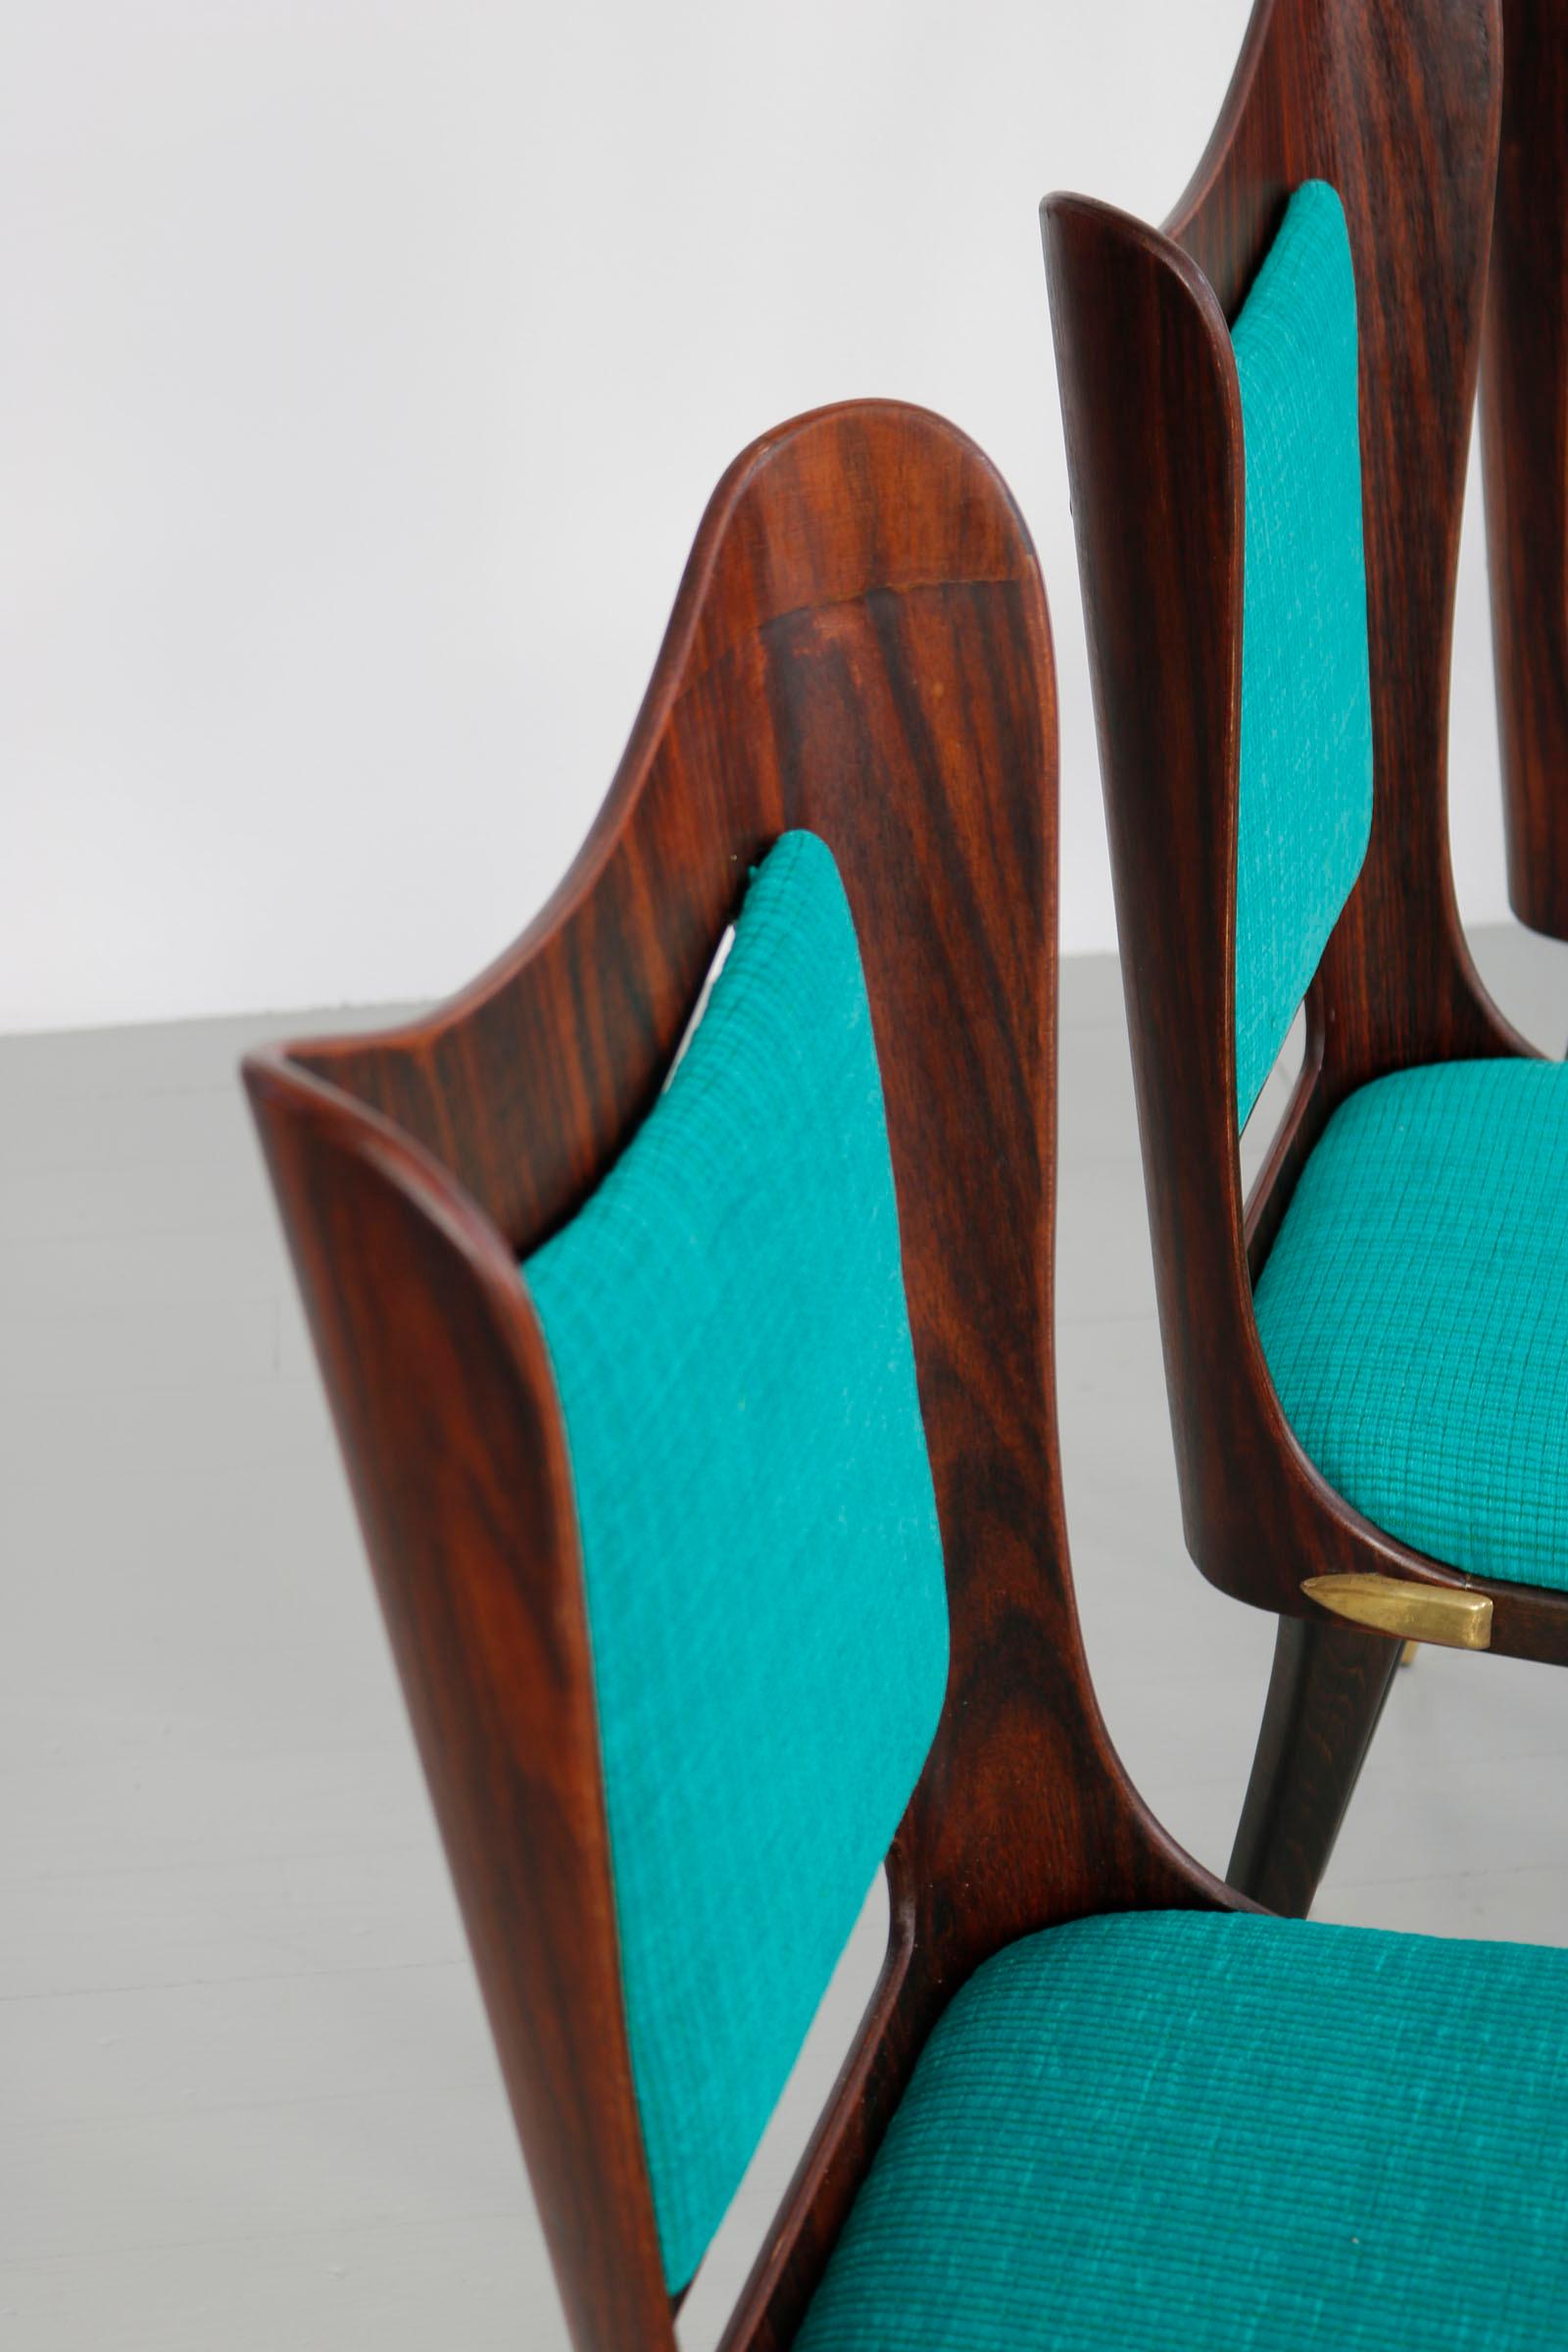 Set of Six Wooden Dining Chairs with Green Upholstery, 1950s For Sale 5